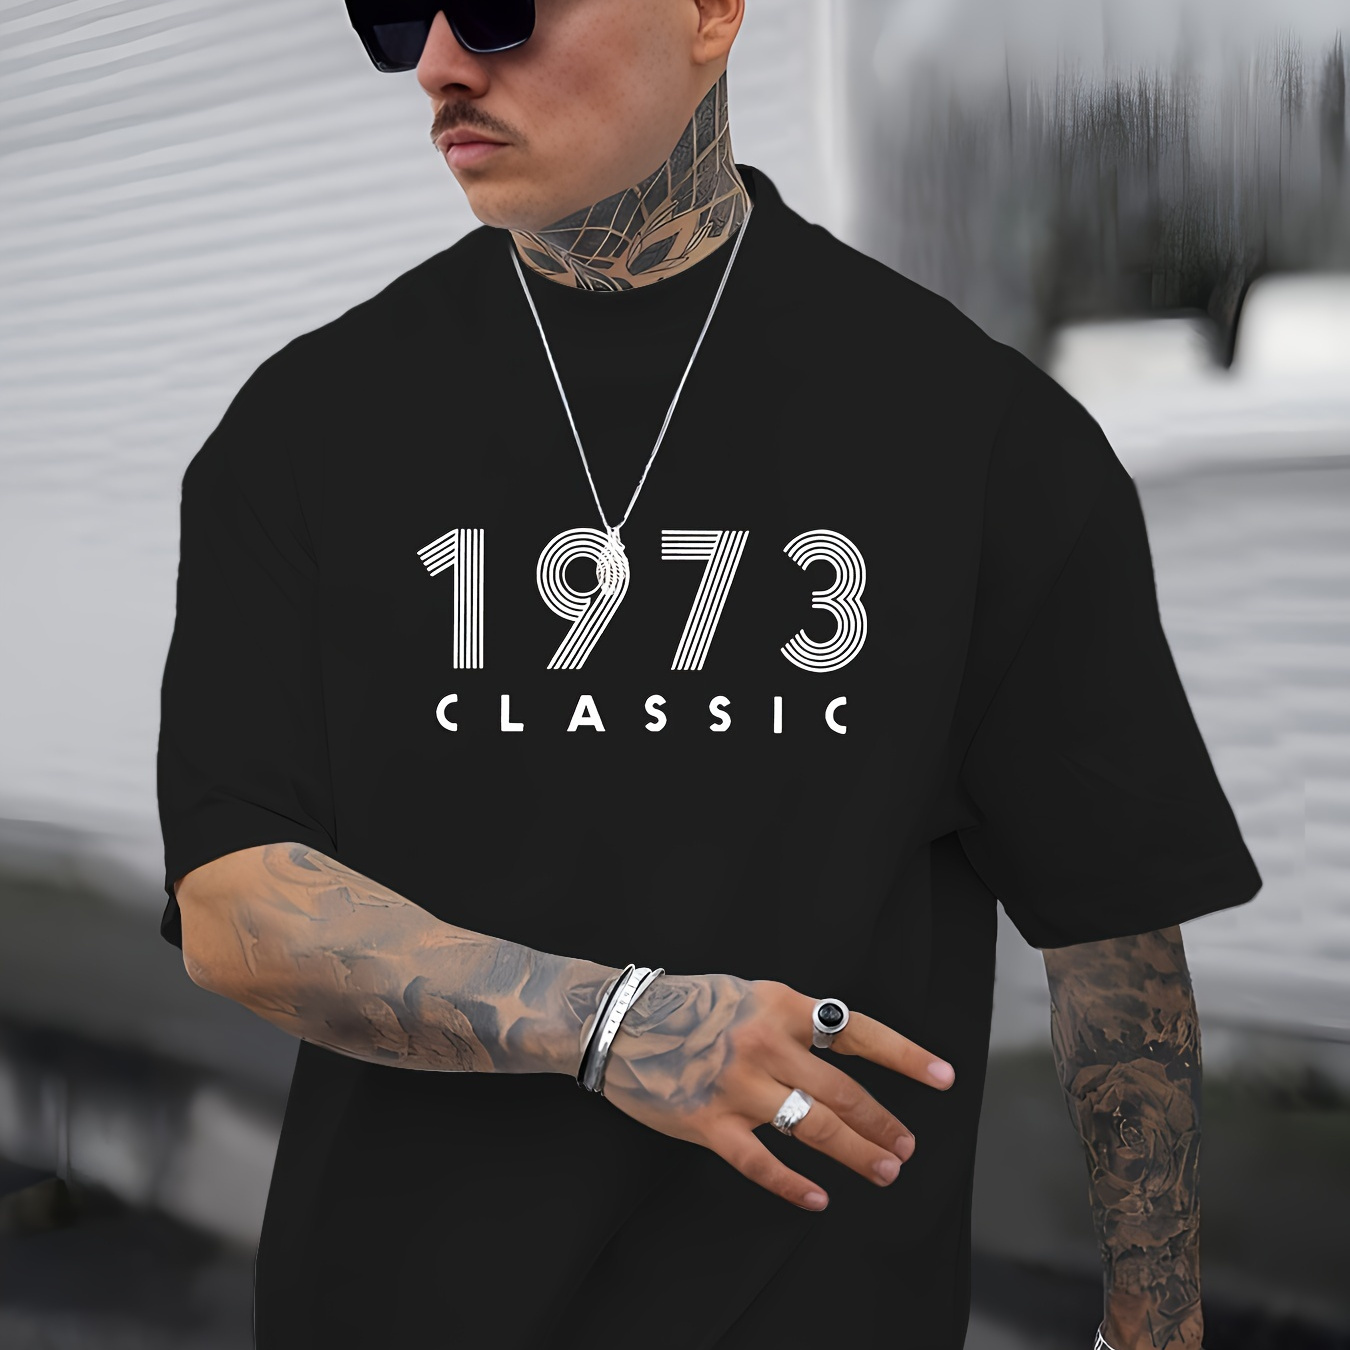 

1973 Classic Letter Graphic Print Men's Creative Top, Casual Short Sleeve Crew Neck T-shirt, Men's Clothing For Summer Outdoor